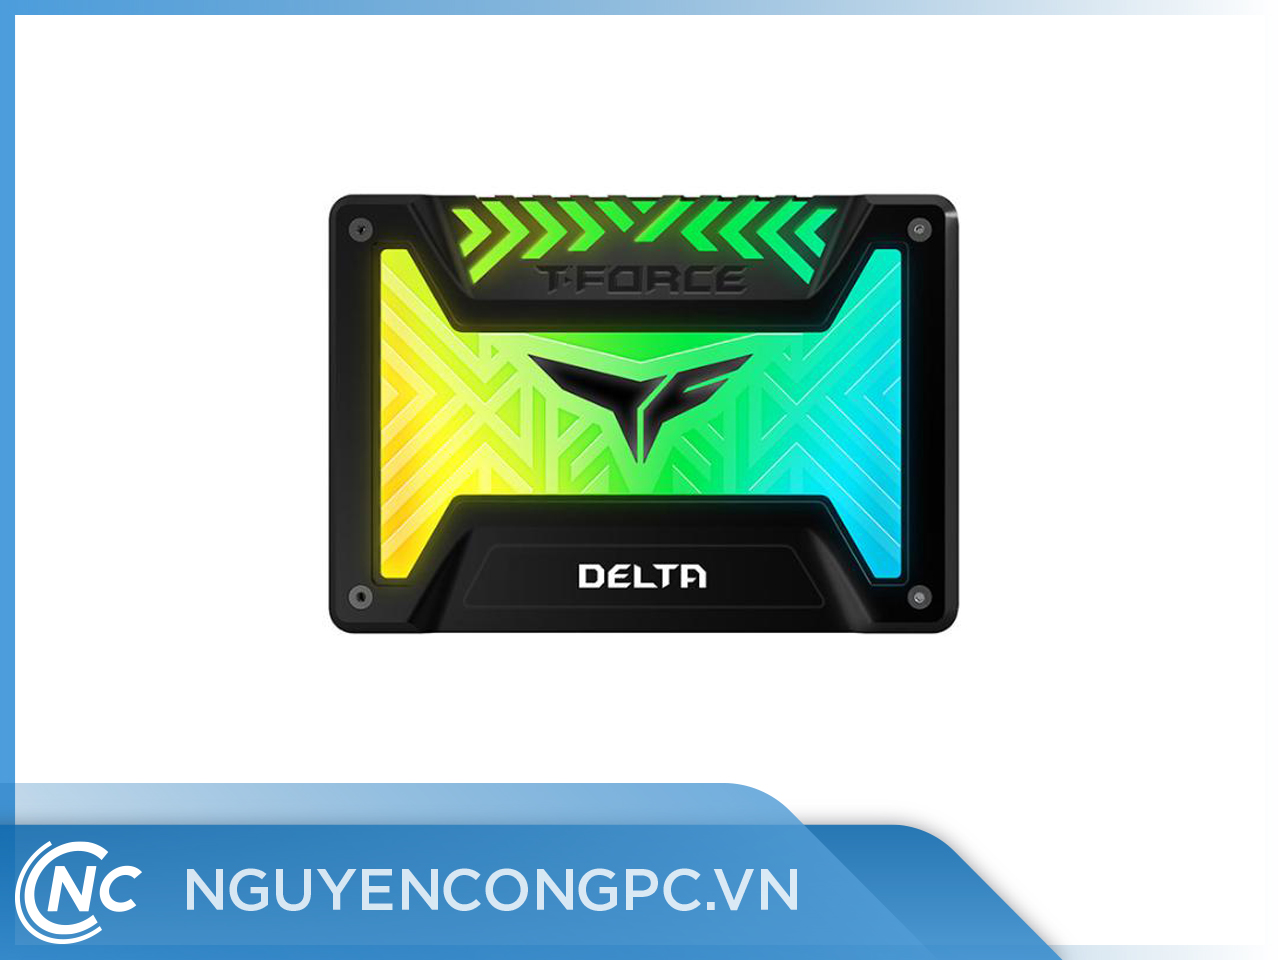 Ổ cứng SSD TeamGroup DELTA RGB 2.5 inch 250GB